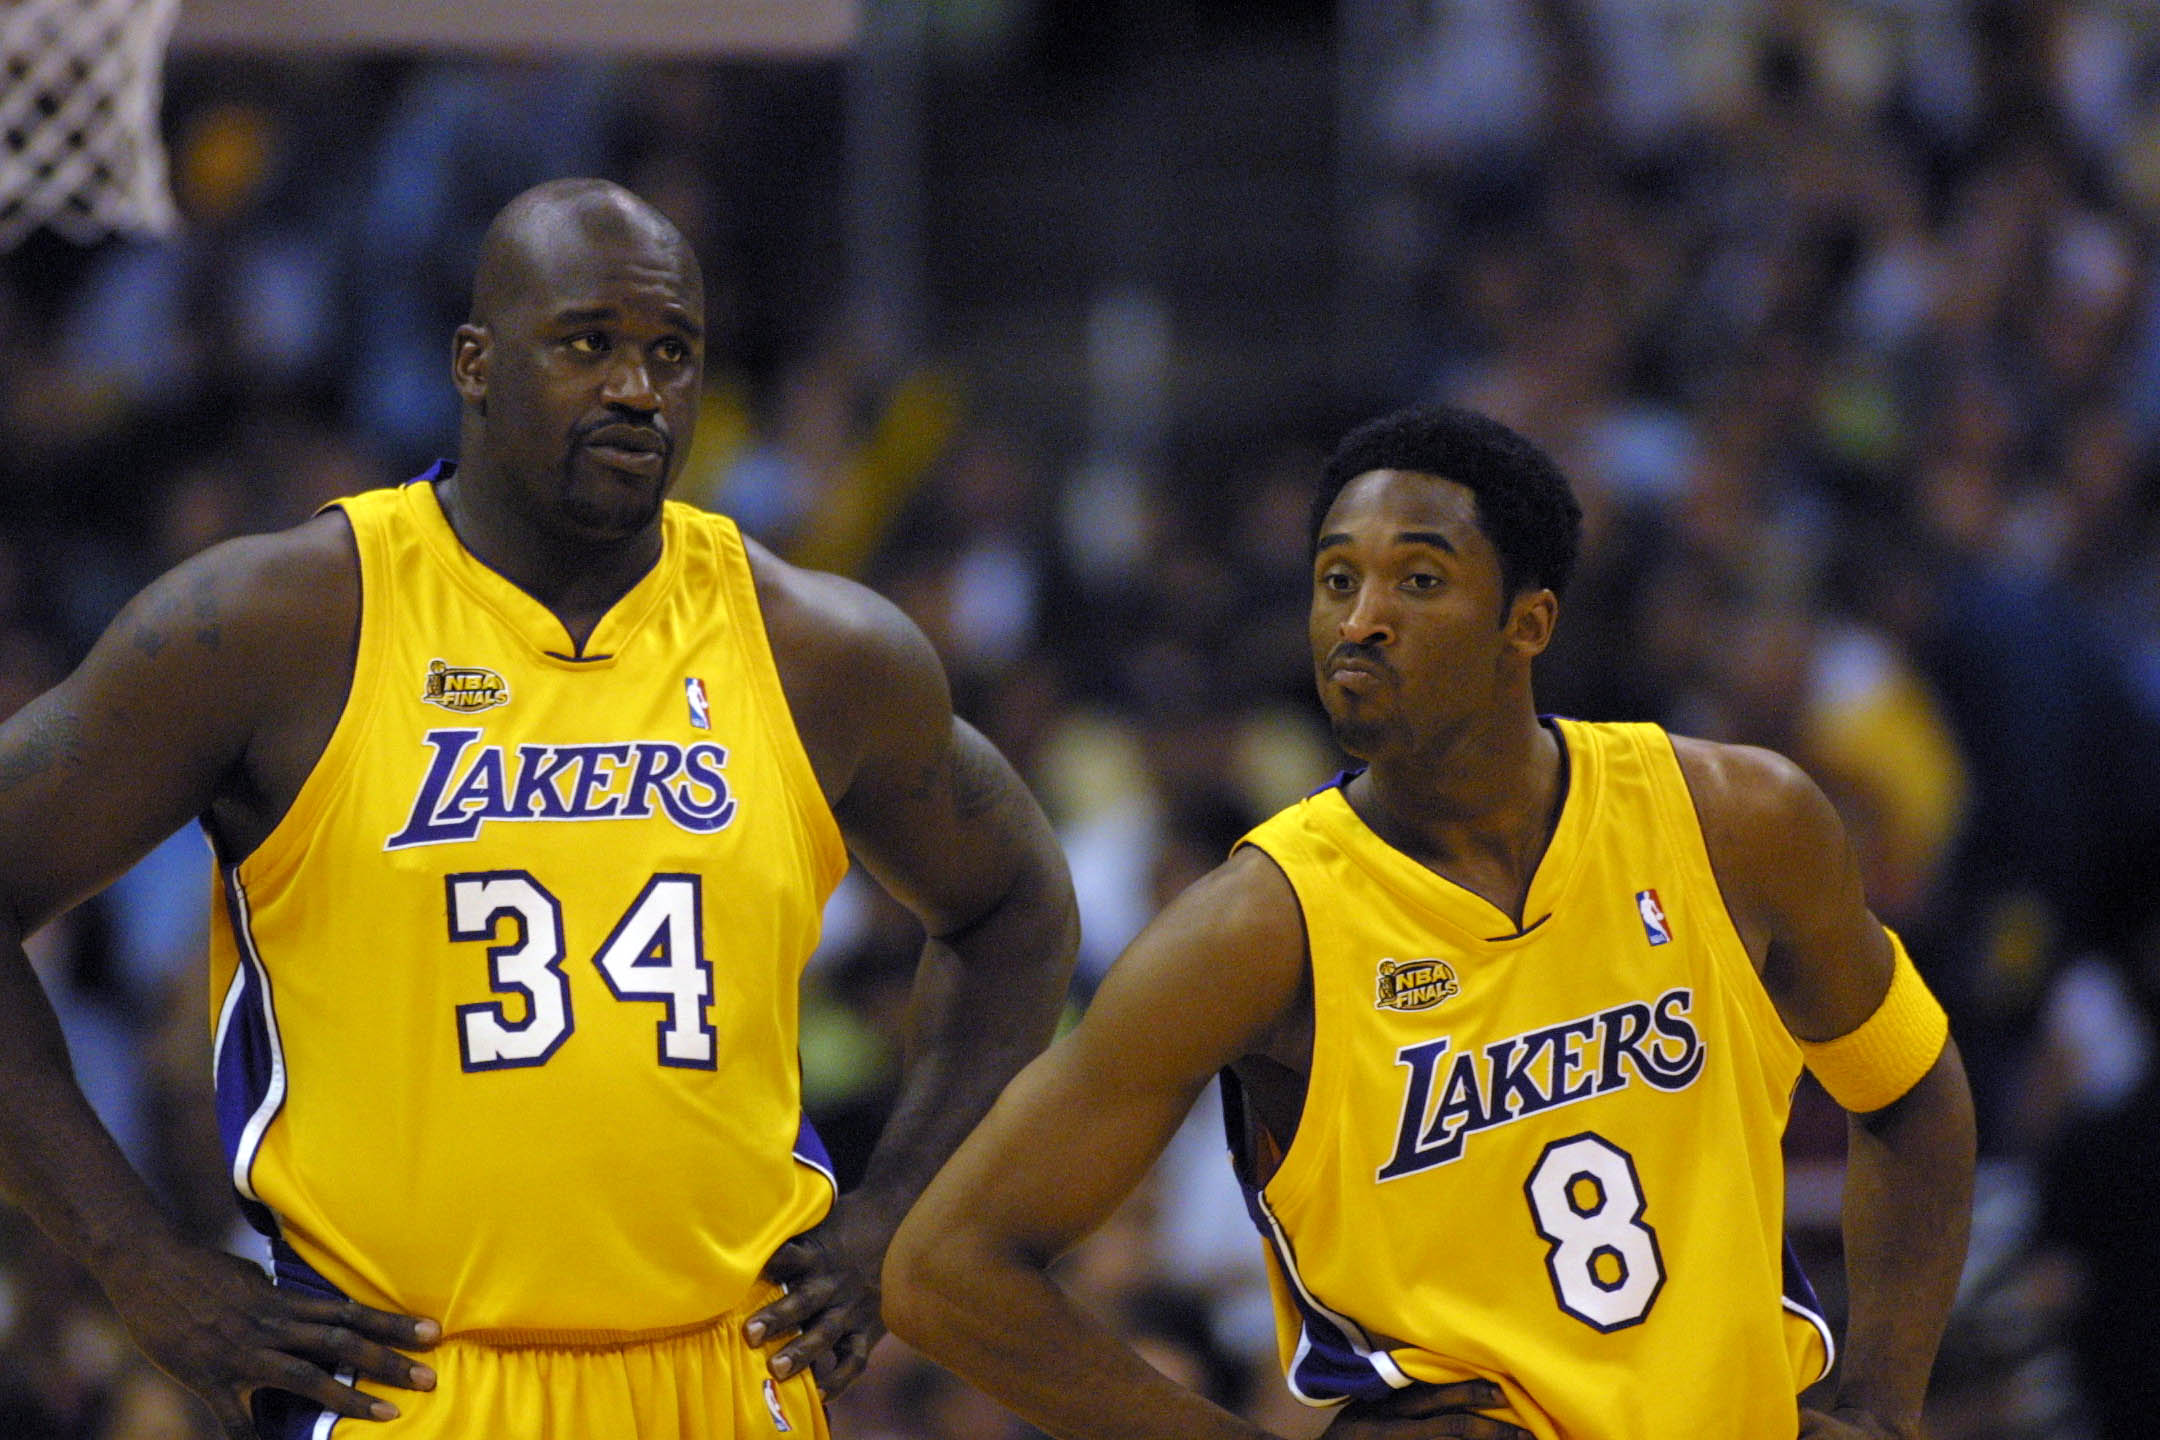 L.A. Lakers Will Kobe Bryant or Shaquille O Neal Have the 